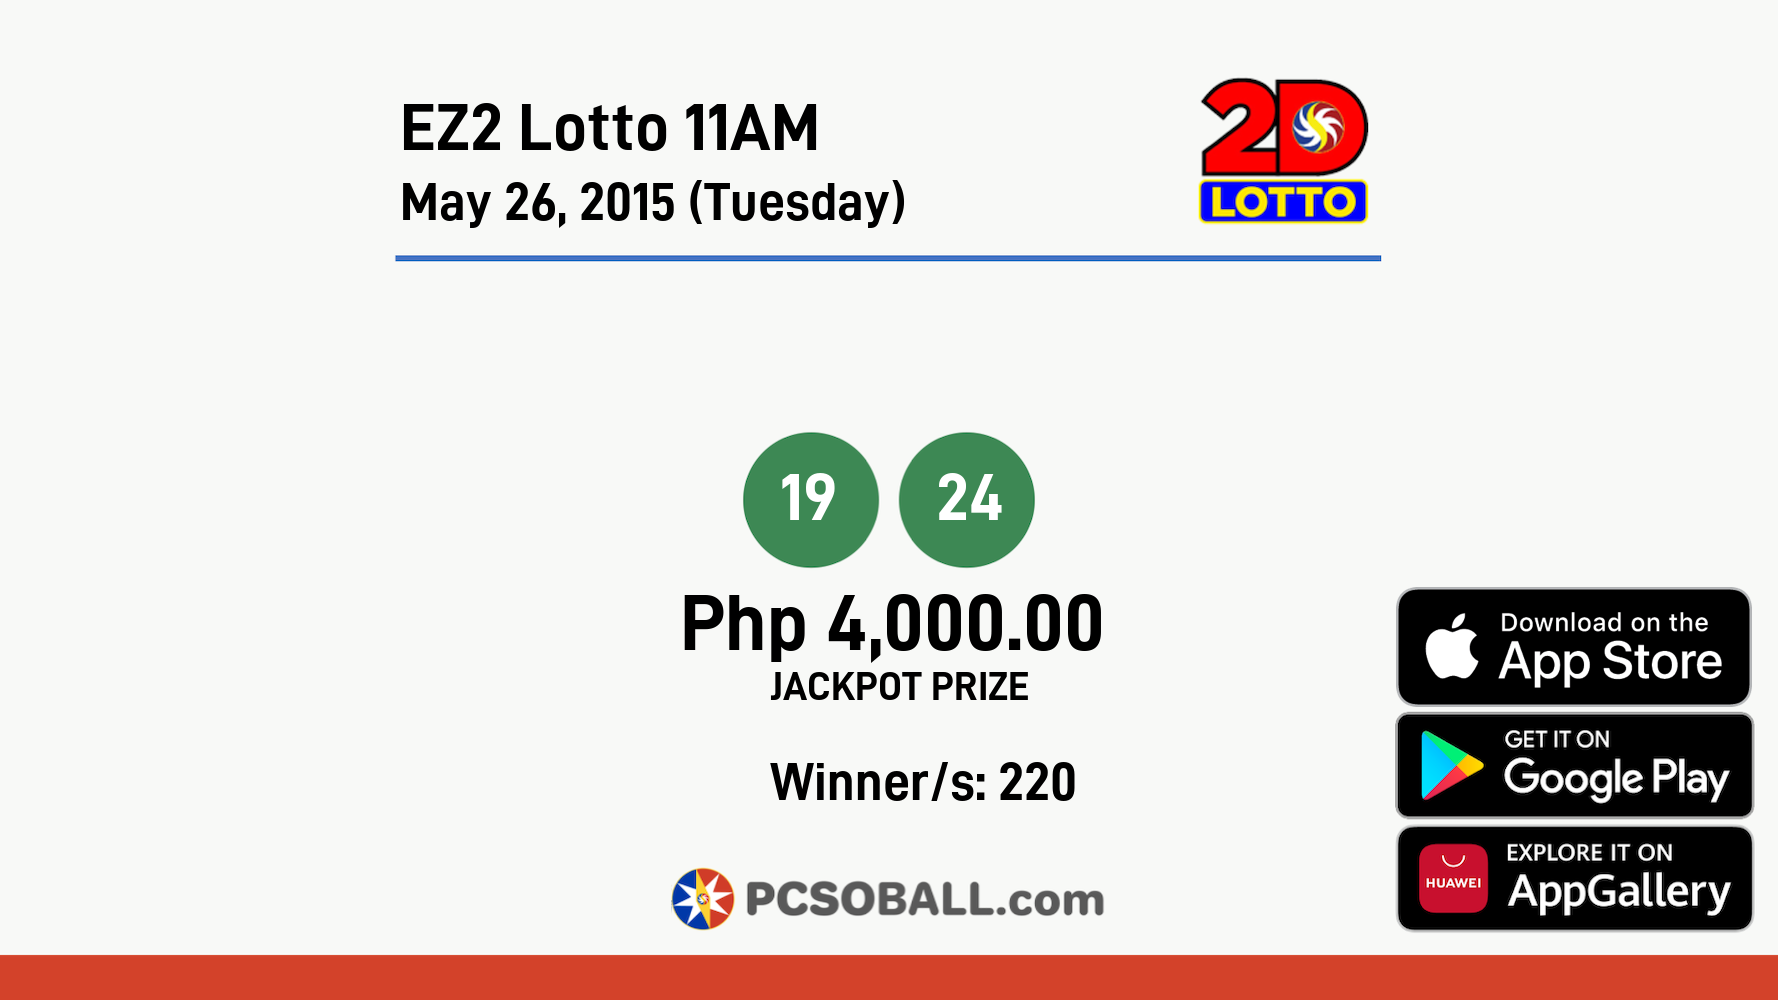 EZ2 Lotto 11AM May 26, 2015 (Tuesday) Result